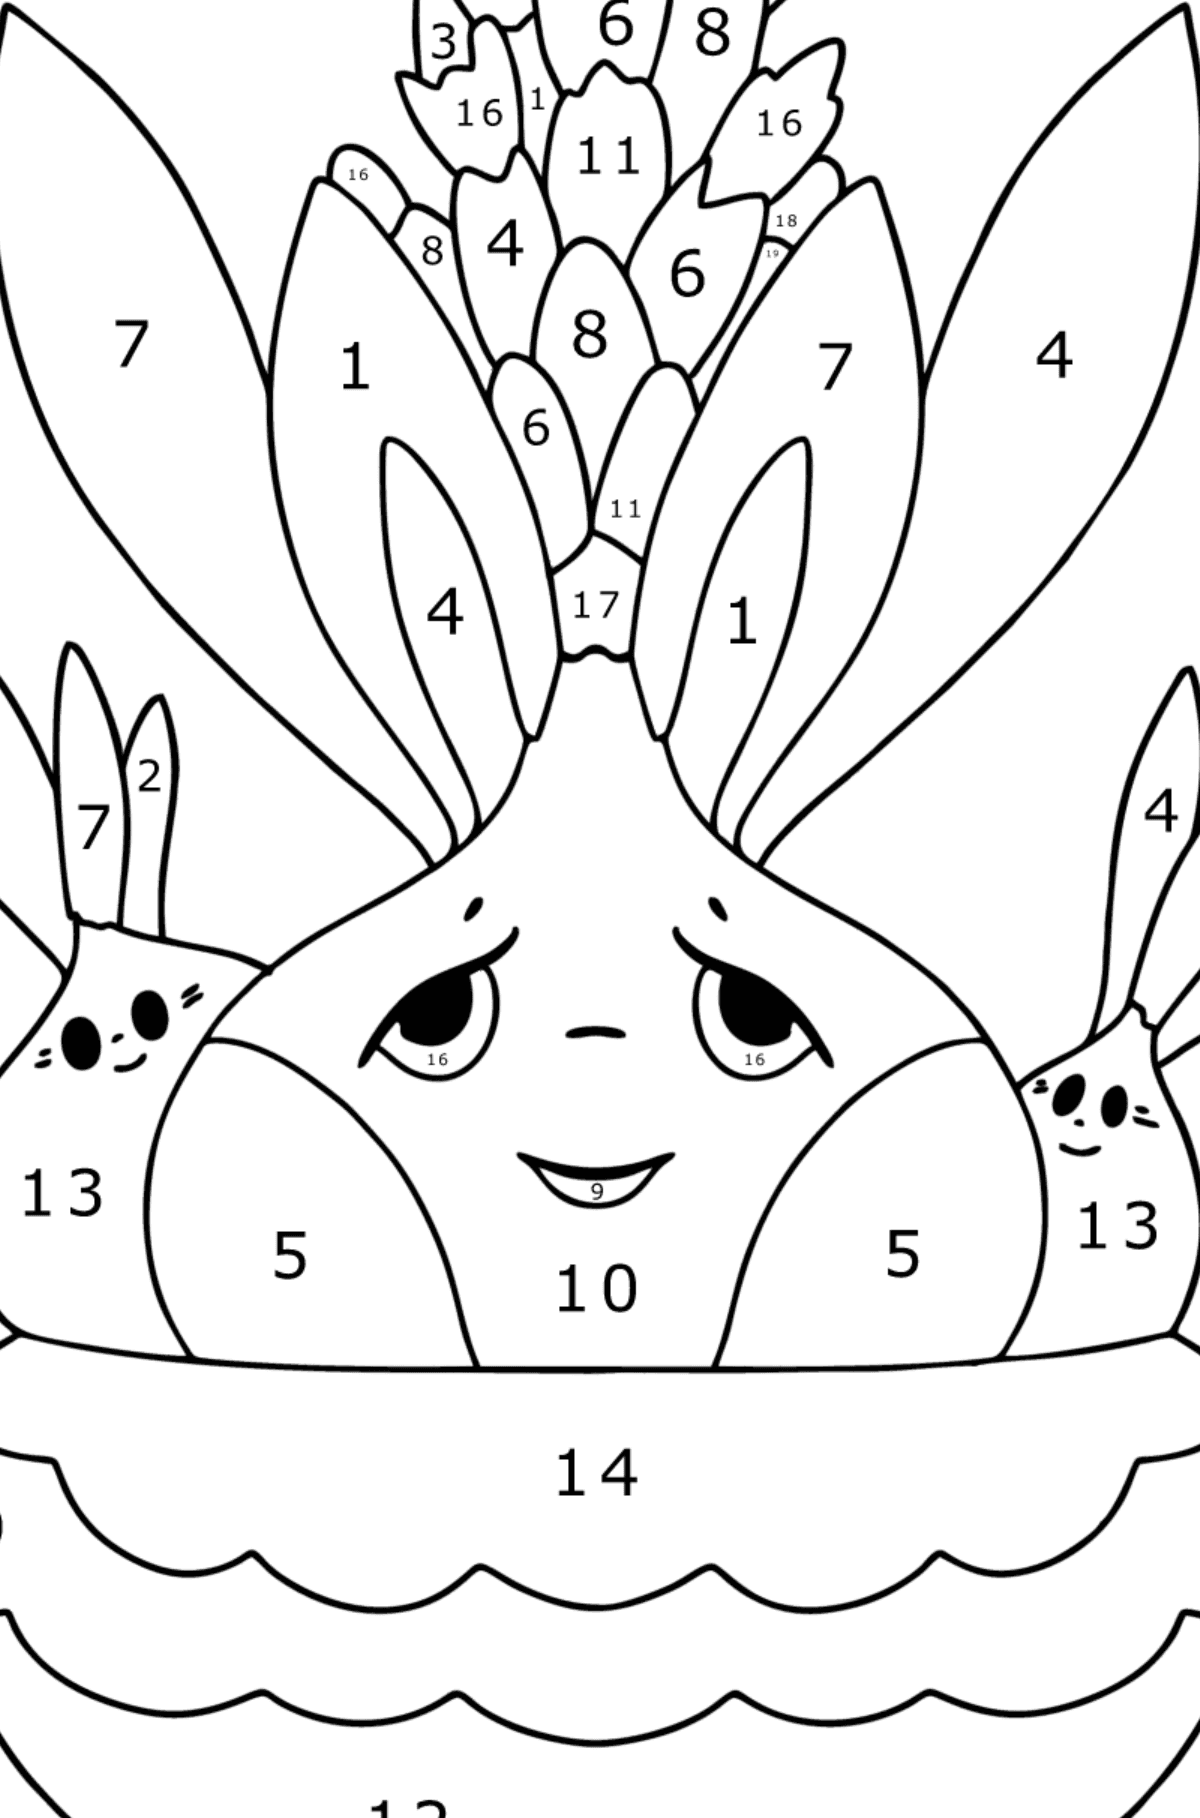 Hyacinth flowers with eyes coloring page - Coloring by Numbers for Kids